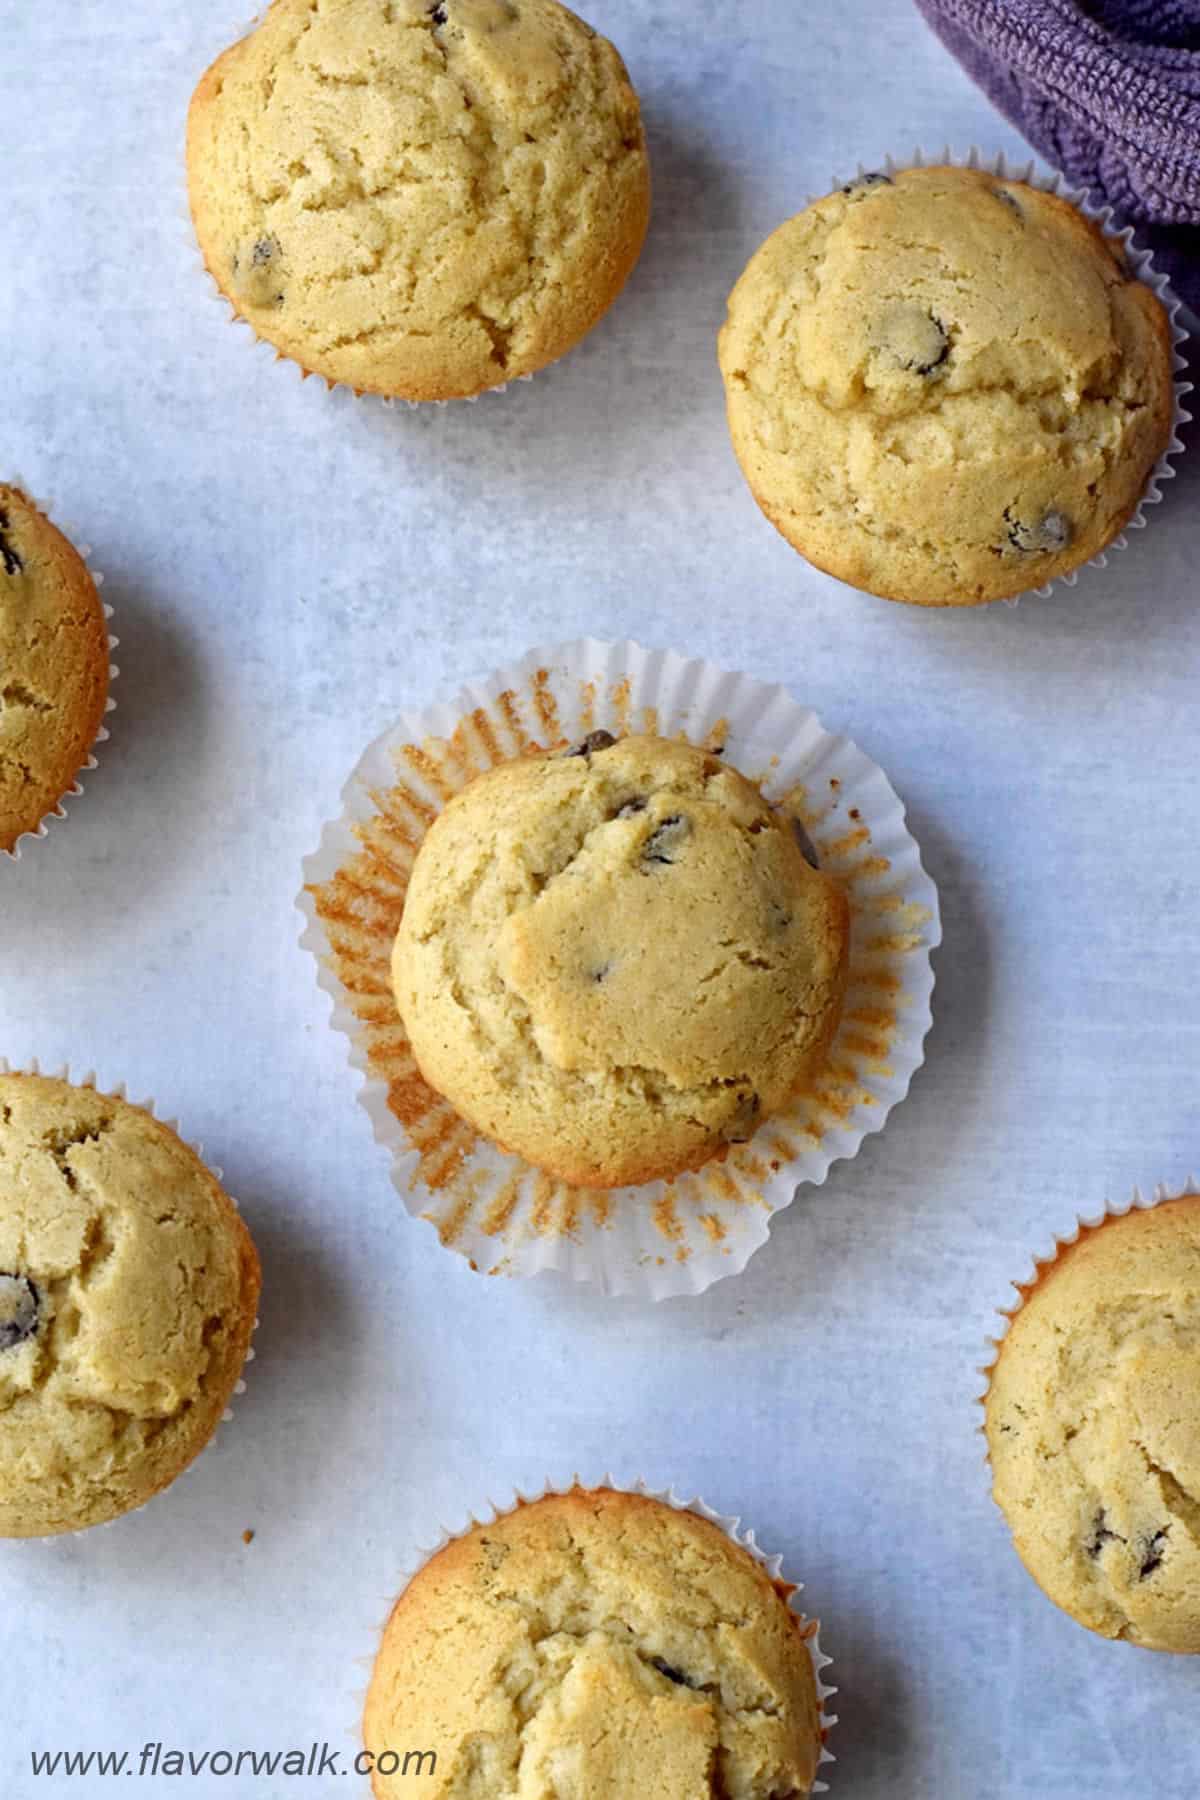 Gluten free chocolate chip muffins scattered on counter with the liner peeled from the sides of the muffin in the middle.